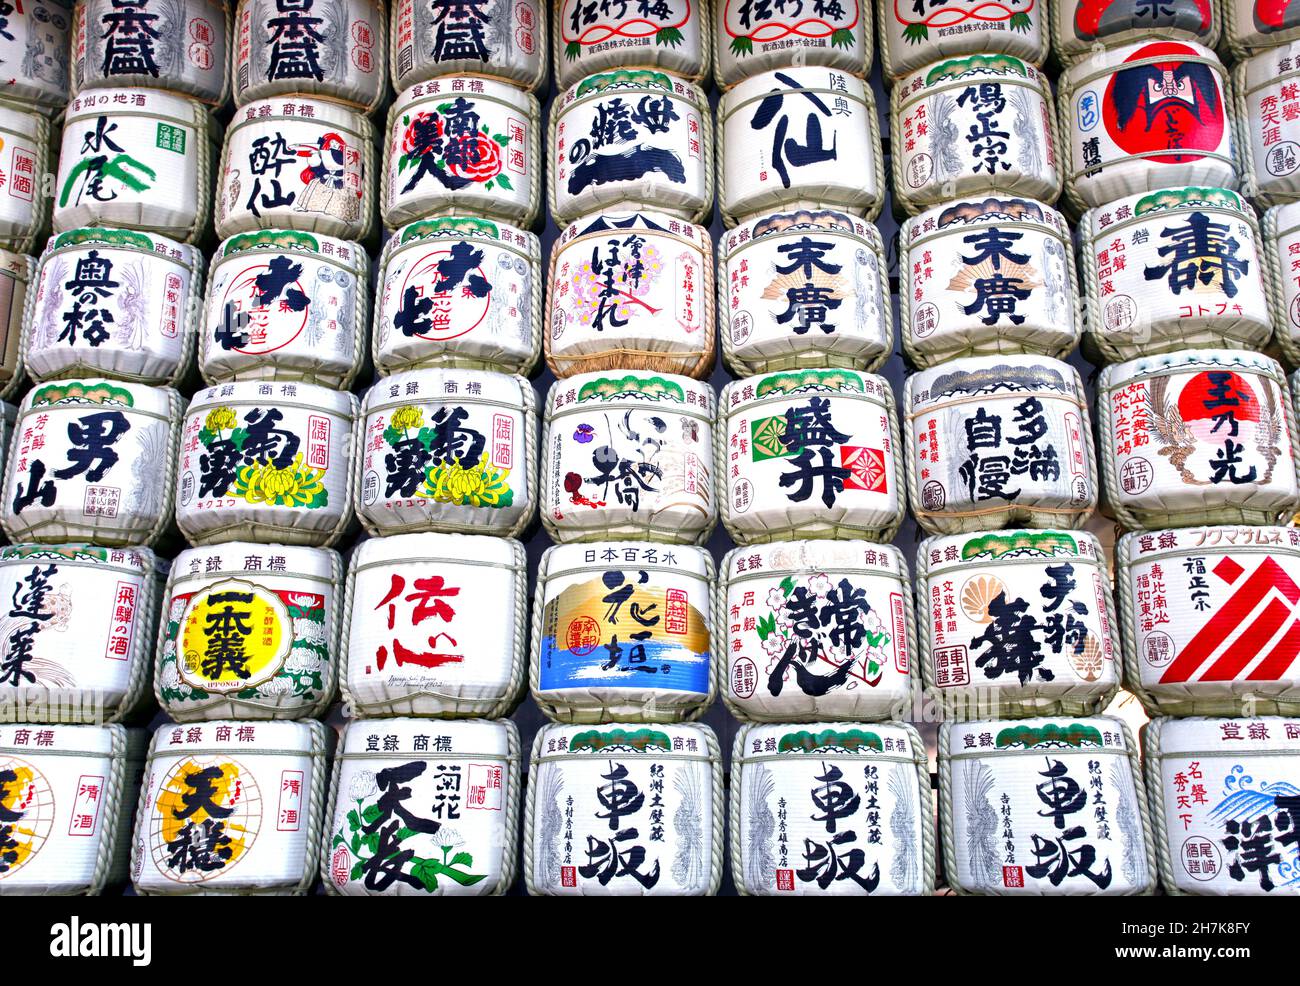 The Meiji Jingu Shrine Sake Barrels can be found along the road to the shrine and are a decorative display giving honor to the gods. Stock Photo